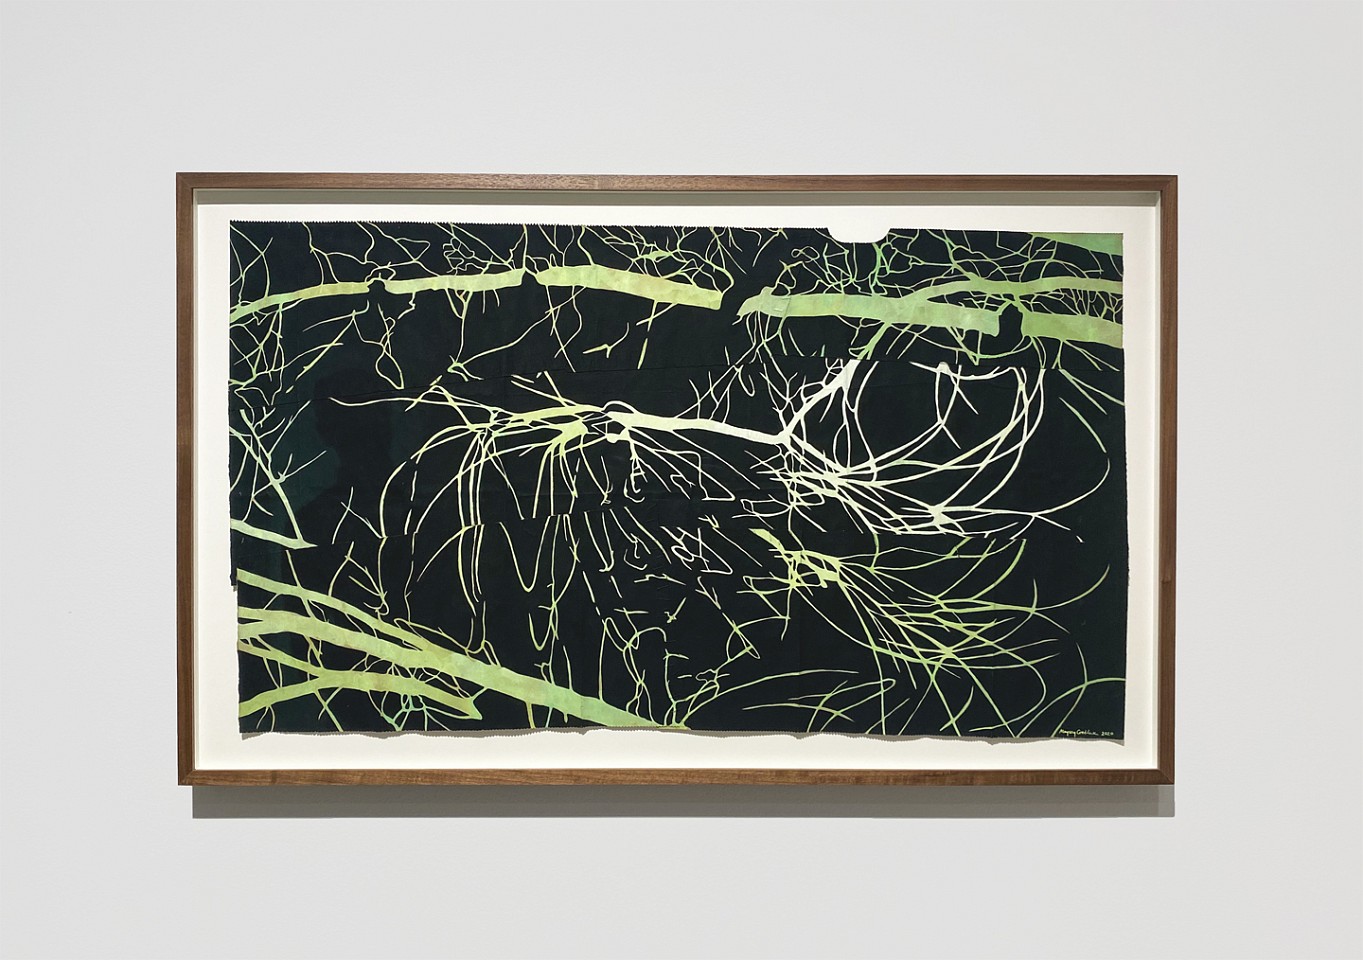 Maysey Craddock
a wave poem, 2020
CRADD077
gouache and thread on found paper, 17 1/8 x 30 1/4 inches
Frame + $1,000.00